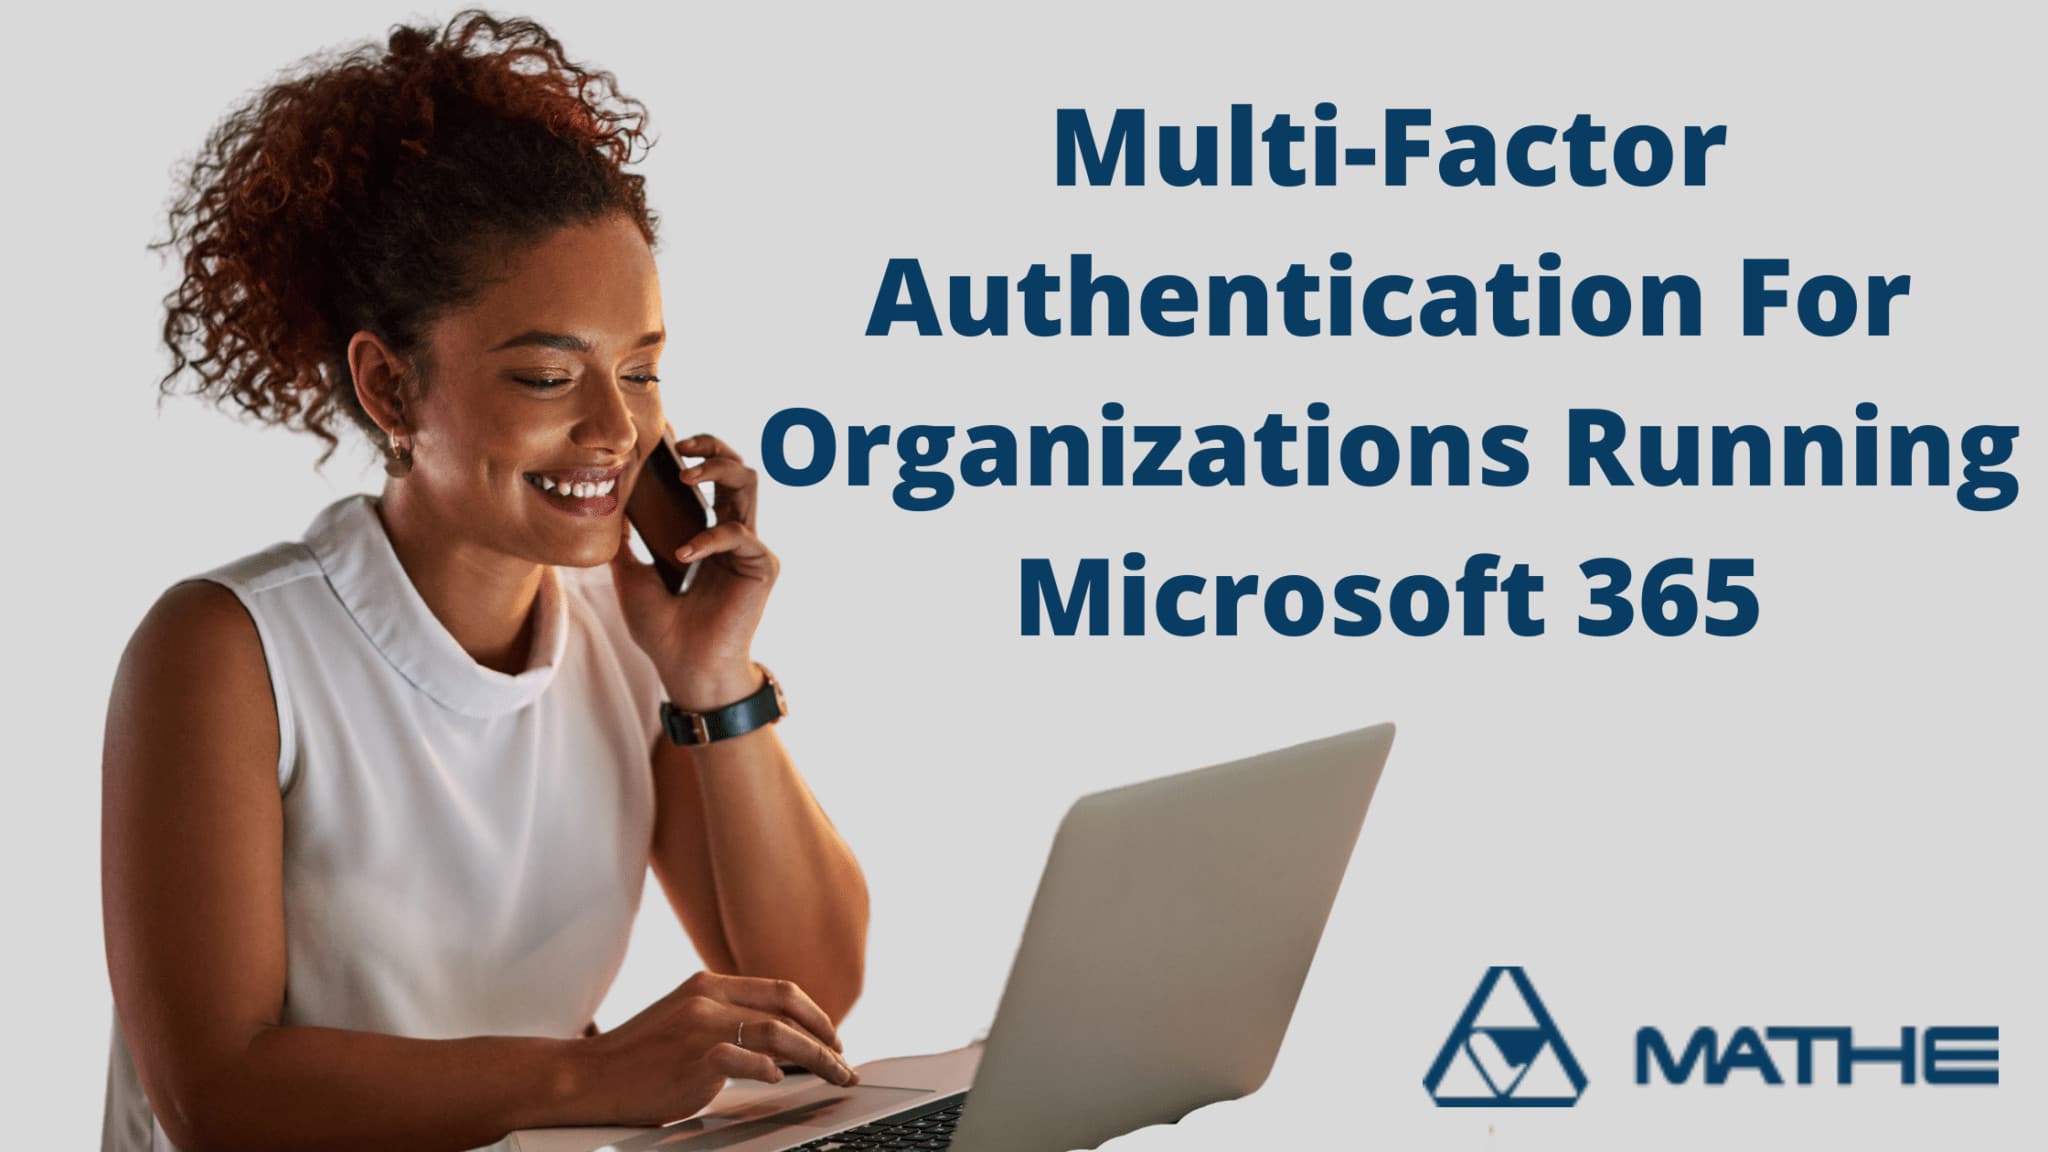 Multi-Factor Authentication For Organizations Running Microsoft 365